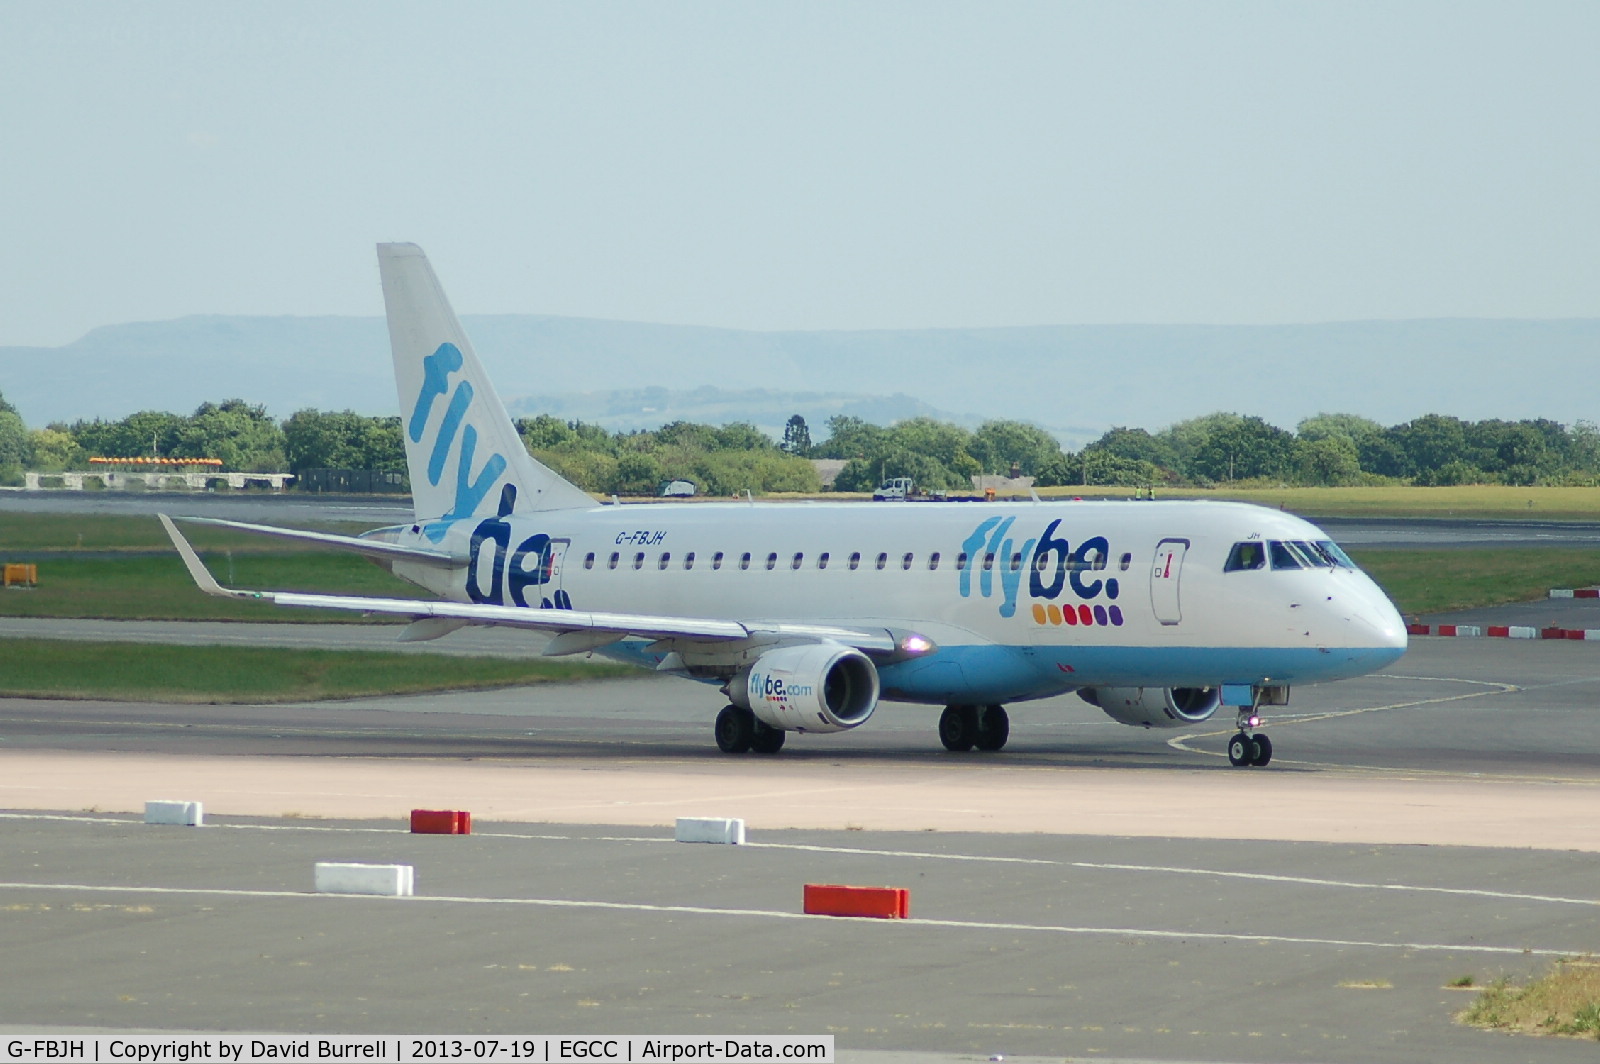 G-FBJH, 2012 Embraer 175STD (ERJ-170-200) C/N 17000351, Flybe Embraer G-FBJH taxiing at Manchester Airport.